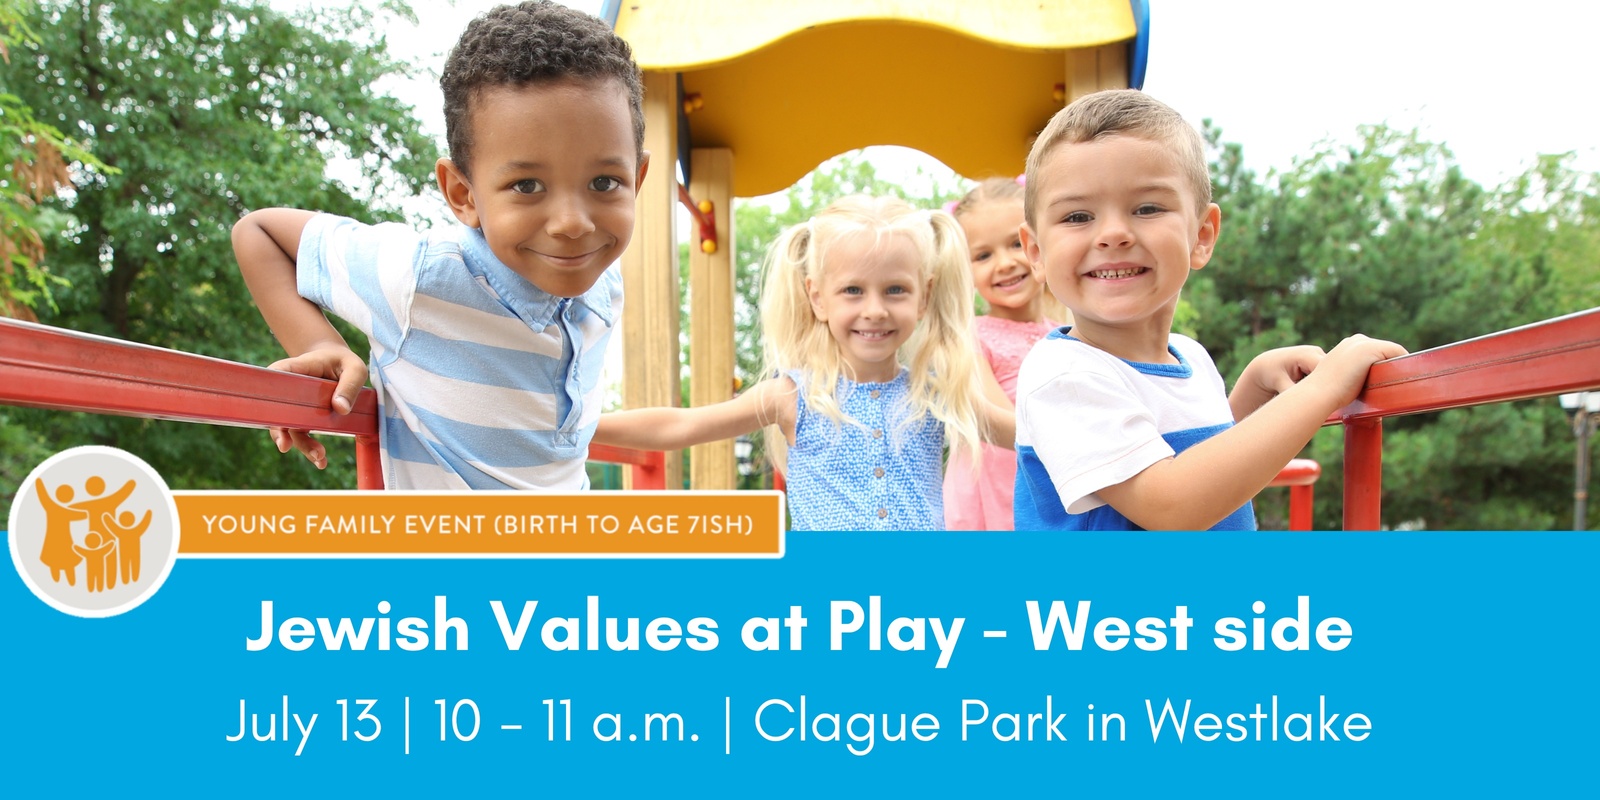 Banner image for Jewish Values at Play - West Side